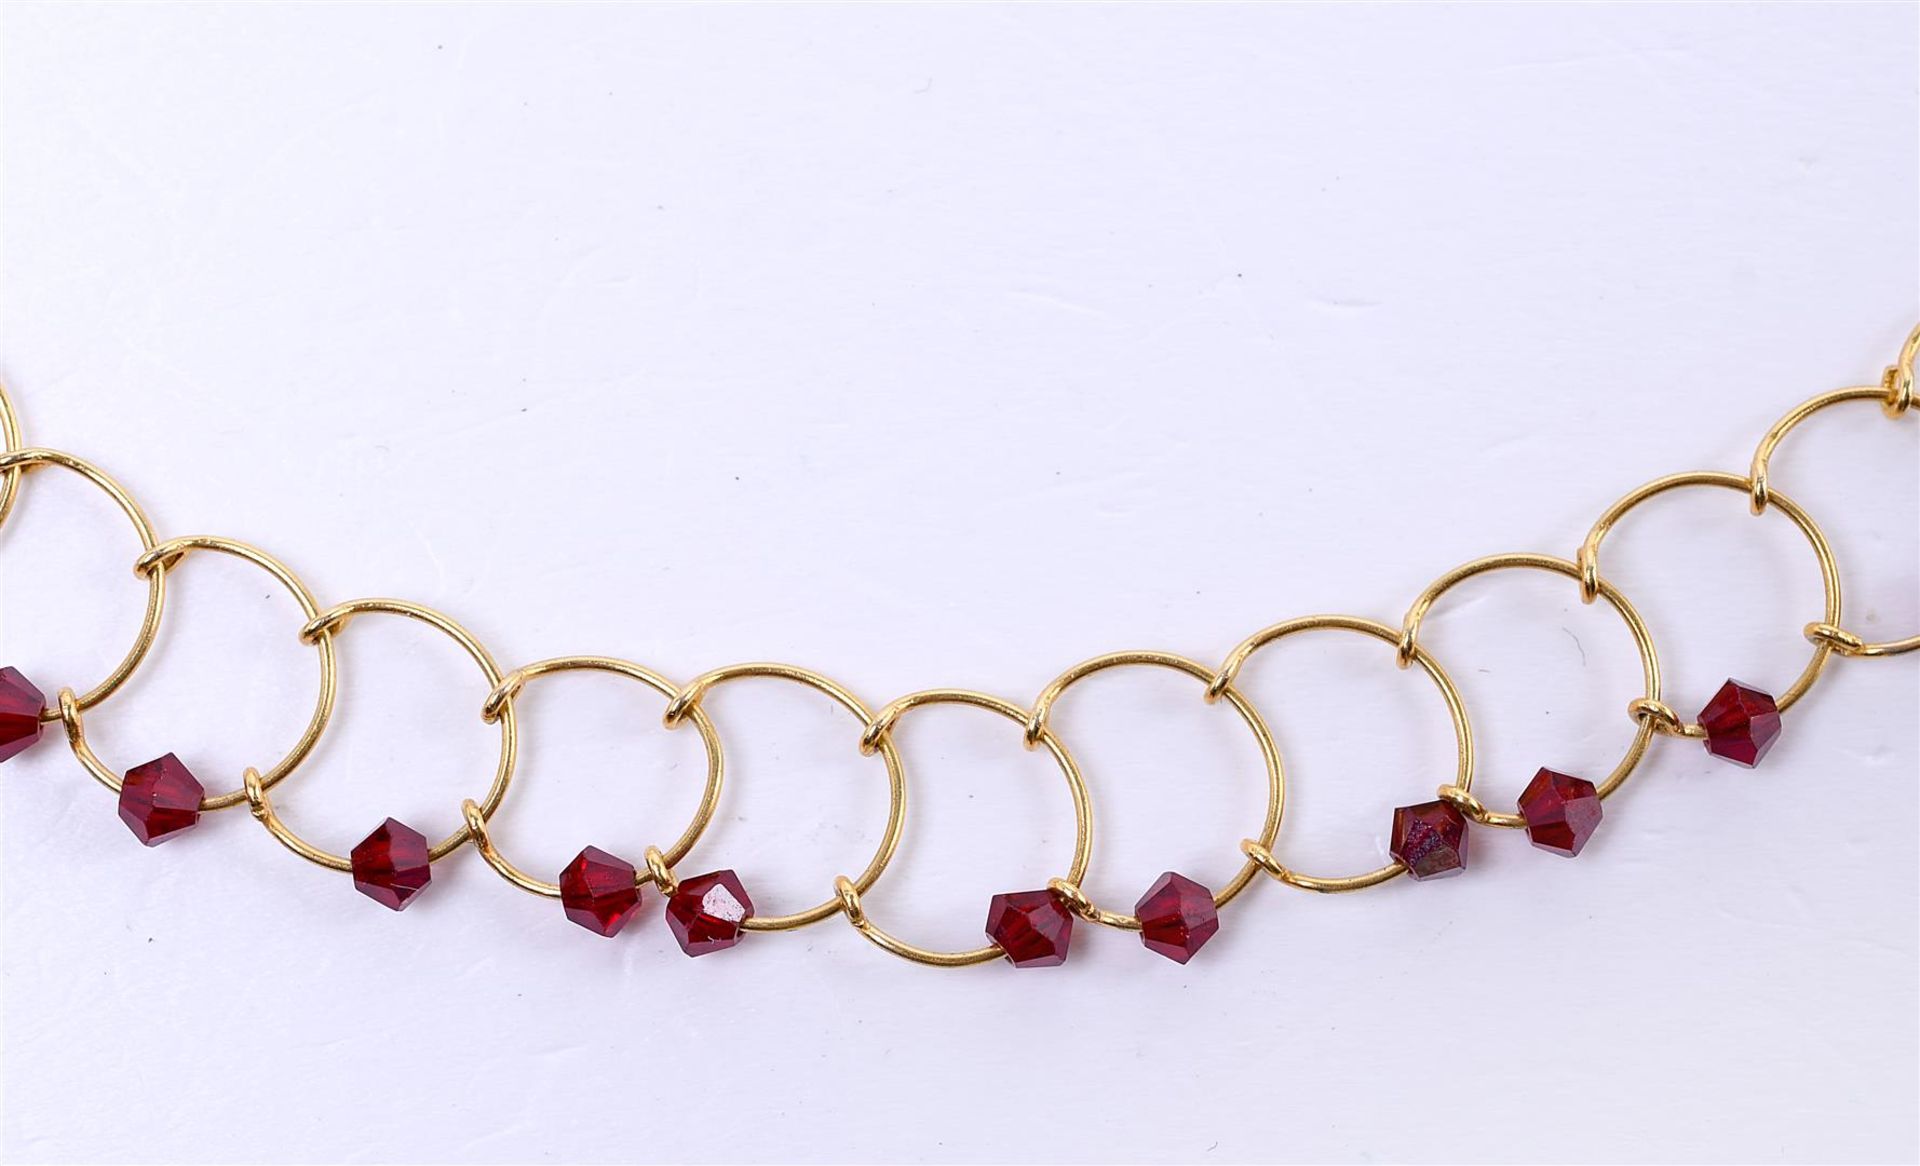 14 kt yellow gold wire necklace set with red crystal stones. Necklace length 41cm - Image 3 of 6